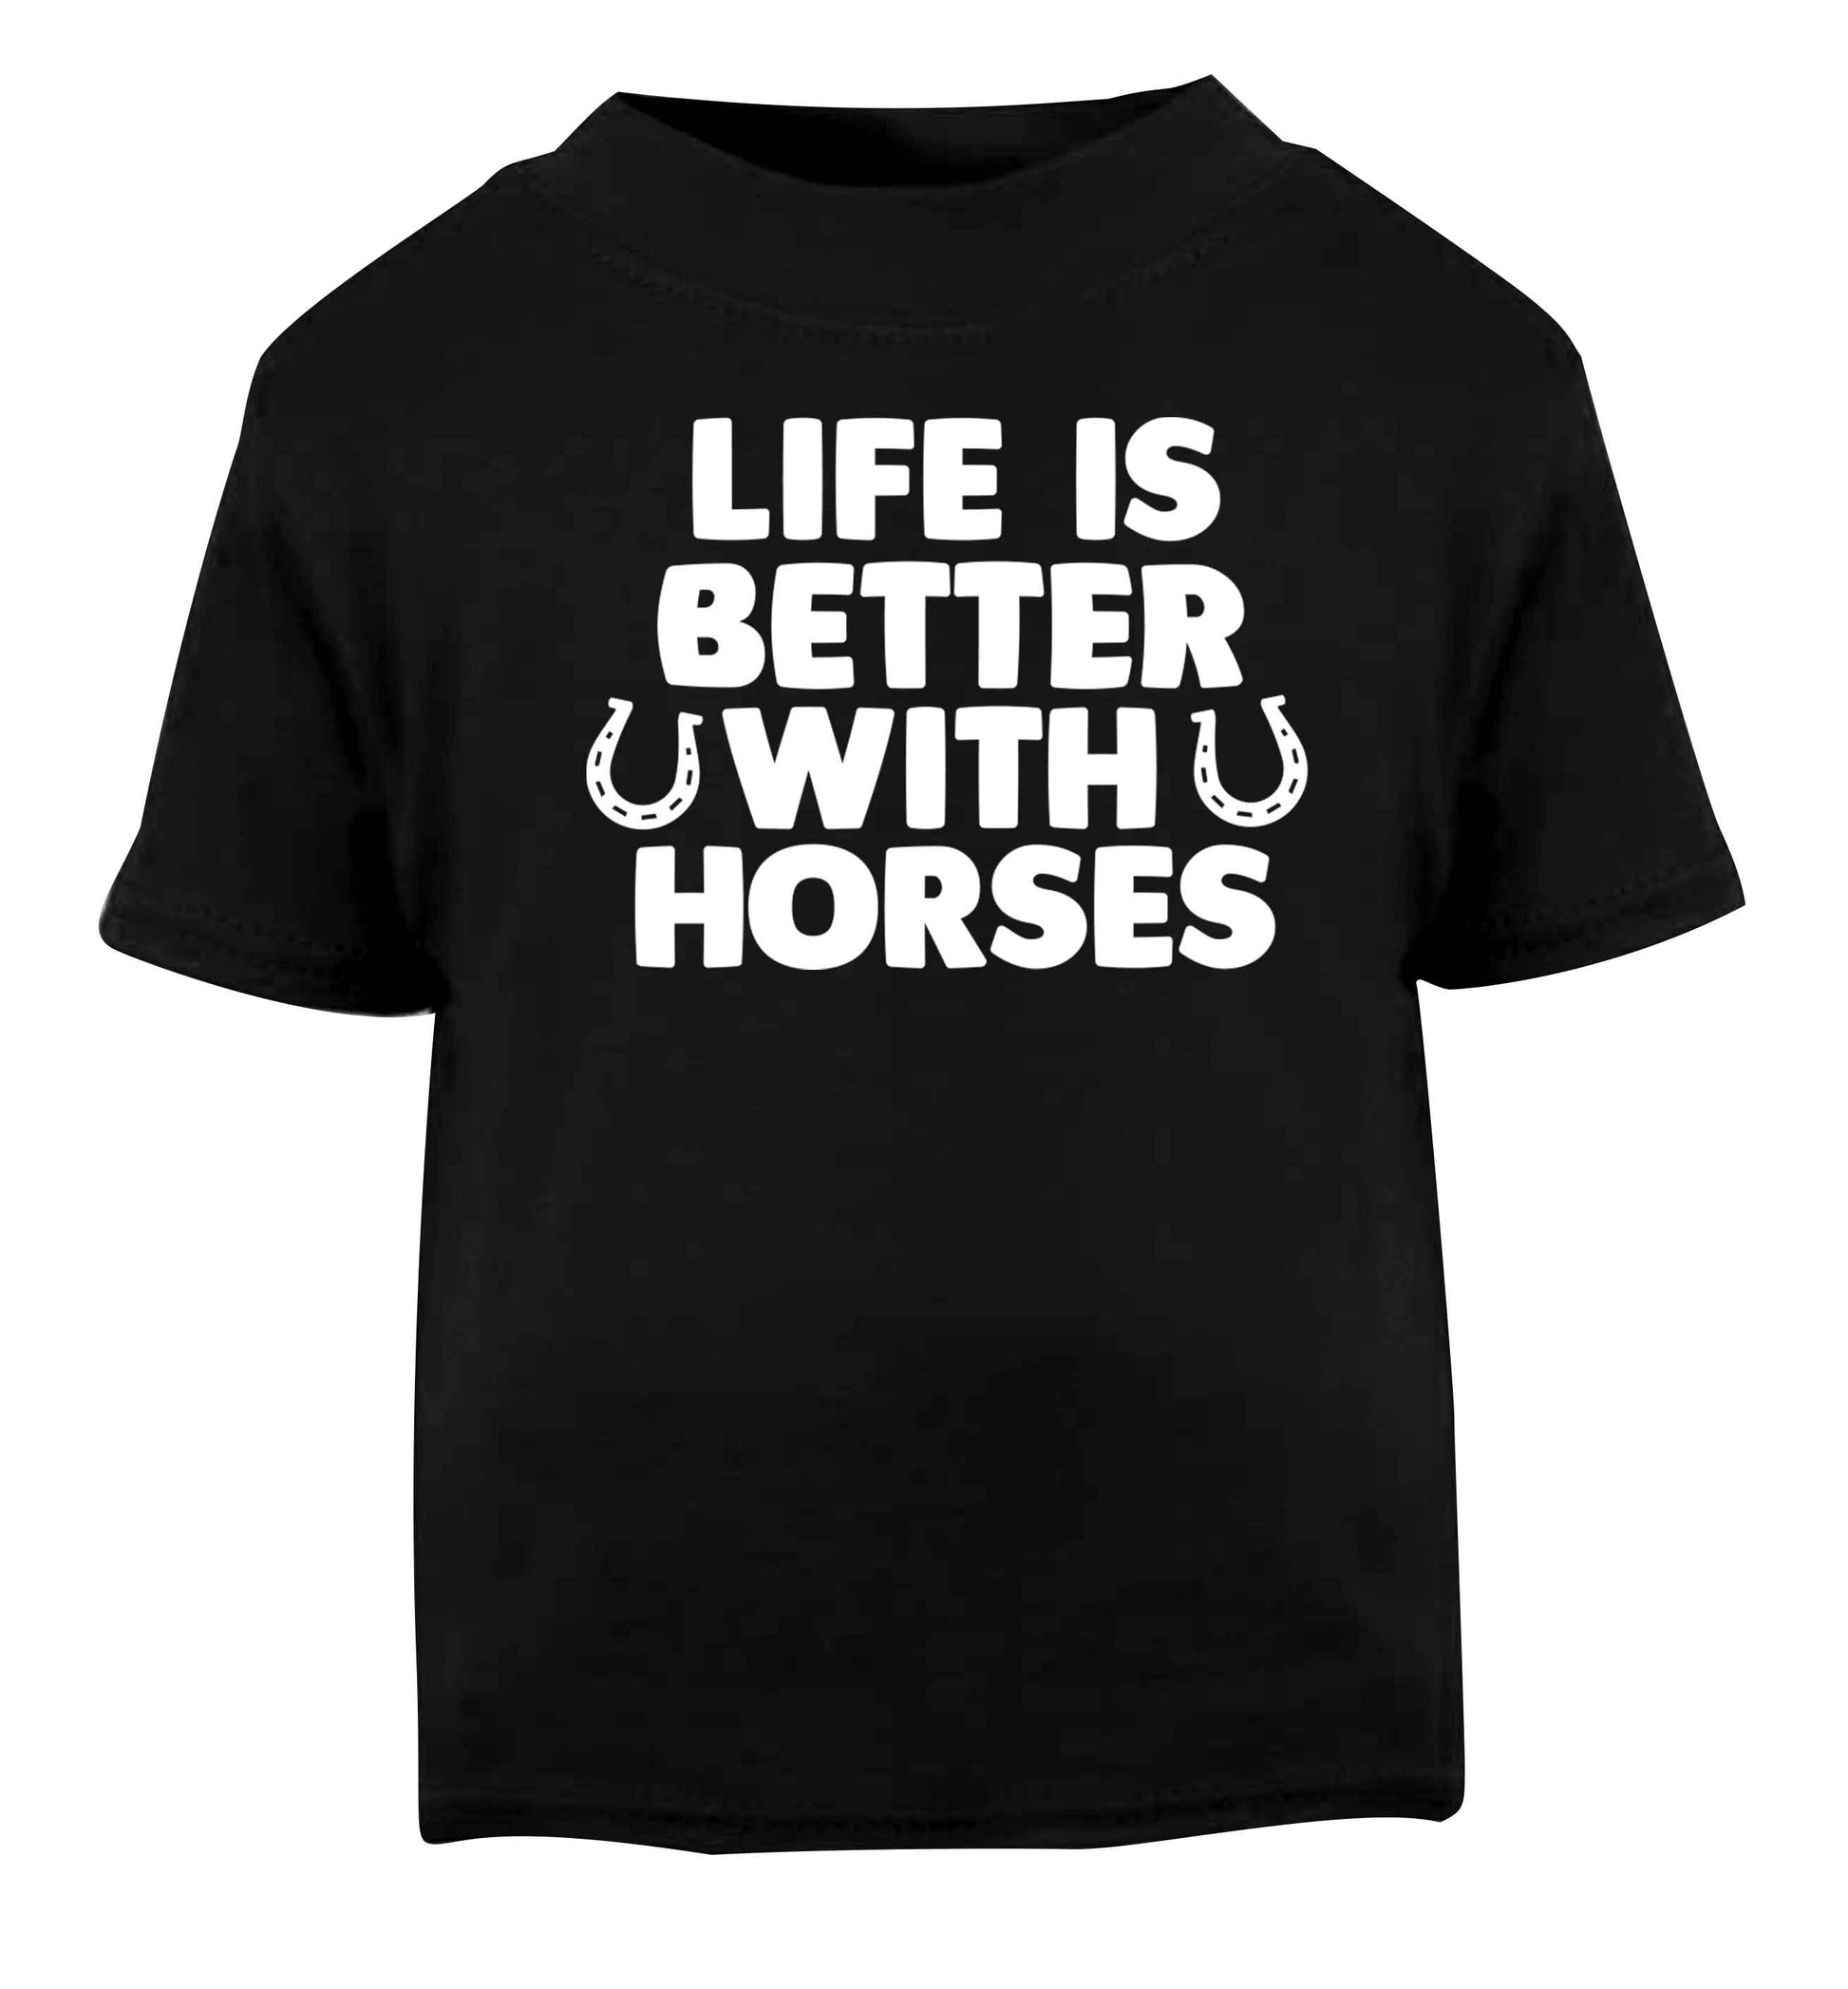 Life is better with horses Black baby toddler Tshirt 2 years